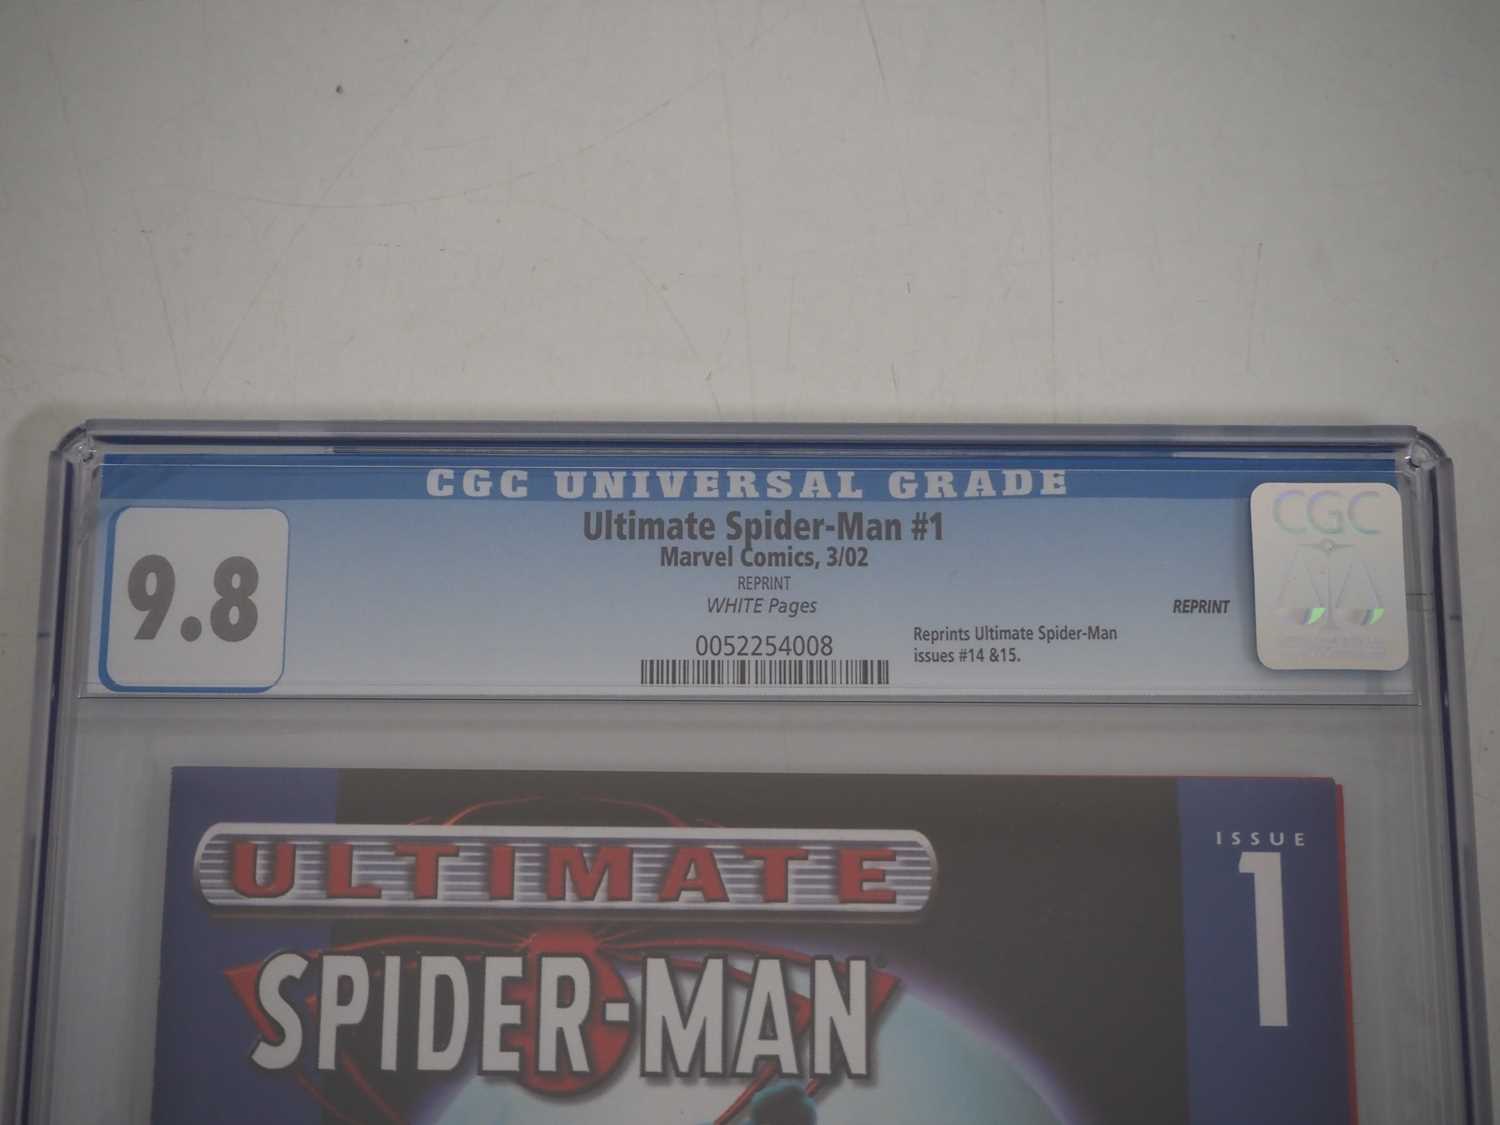 ULTIMATE SPIDER-MAN #1 VARIANT COVER REPRINT (2000 - MARVEL) - GRADED 9.8(NM/MINT) by CGC - Target - Image 3 of 4